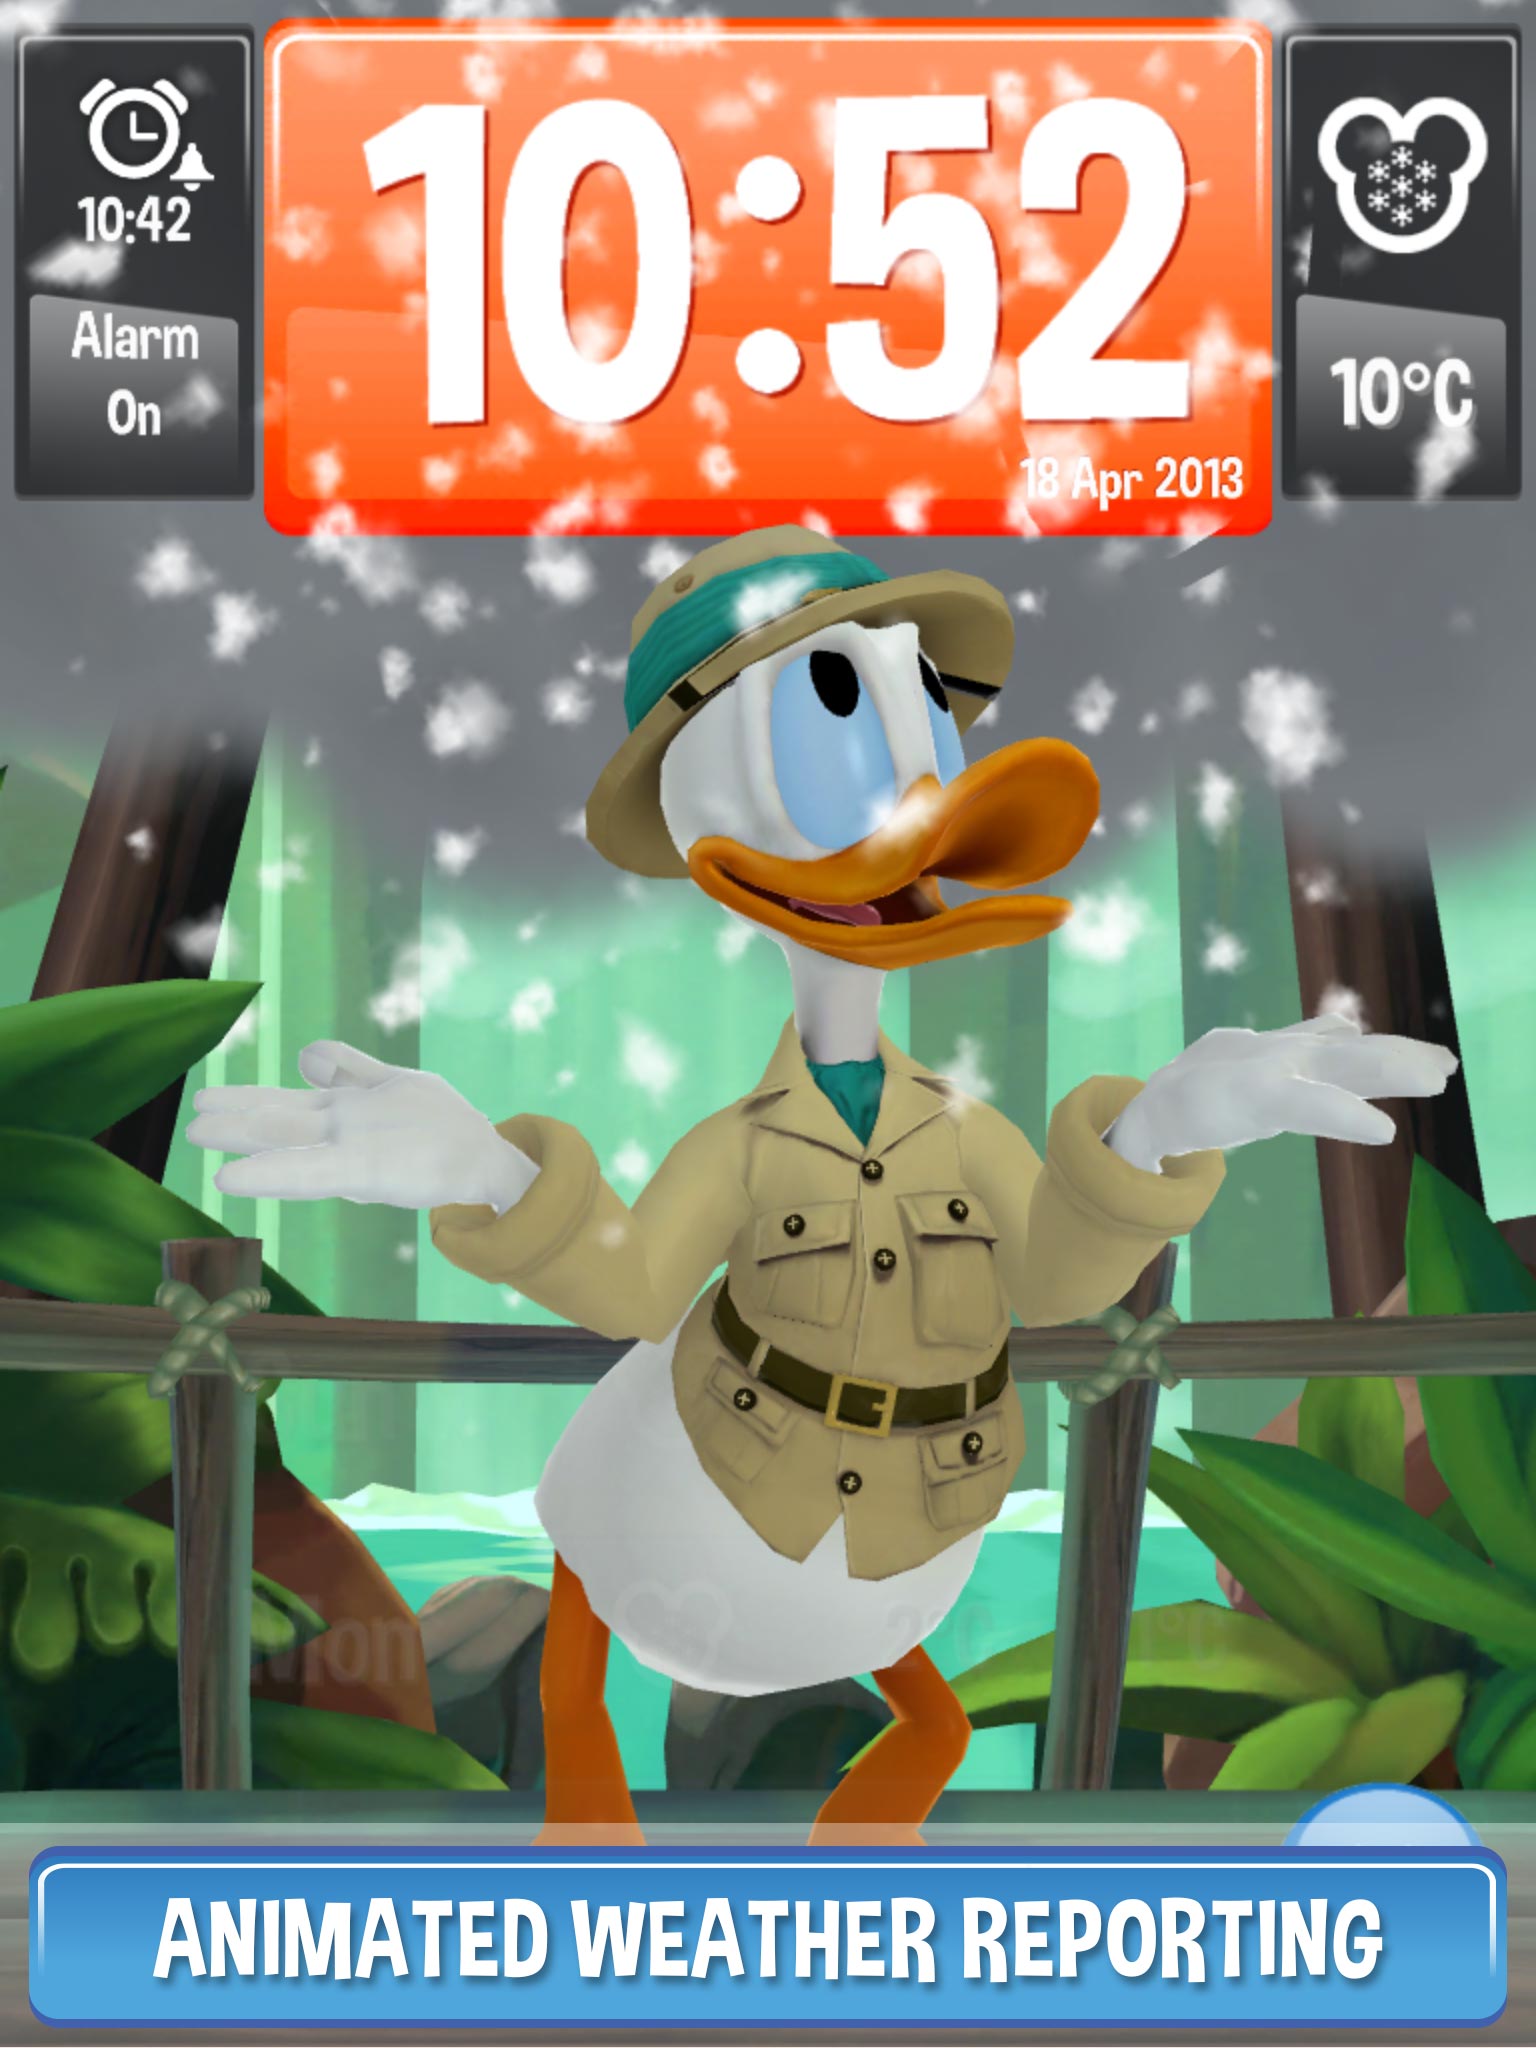 Start Your Day with Donald Duck in “Wake Up with Disney” App